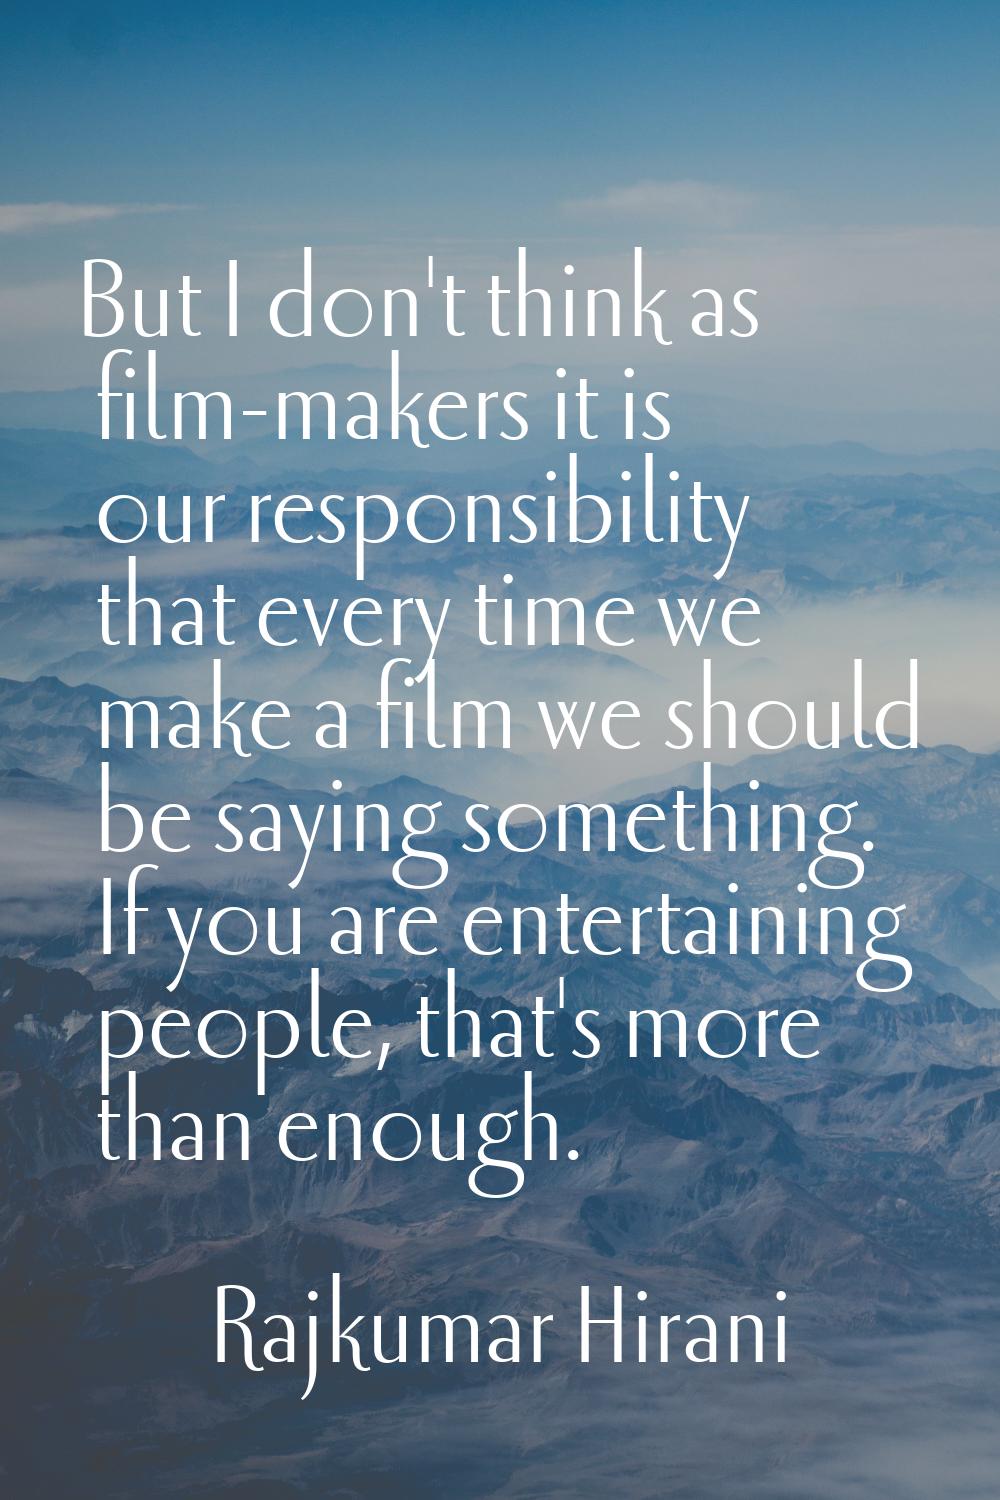 But I don't think as film-makers it is our responsibility that every time we make a film we should 